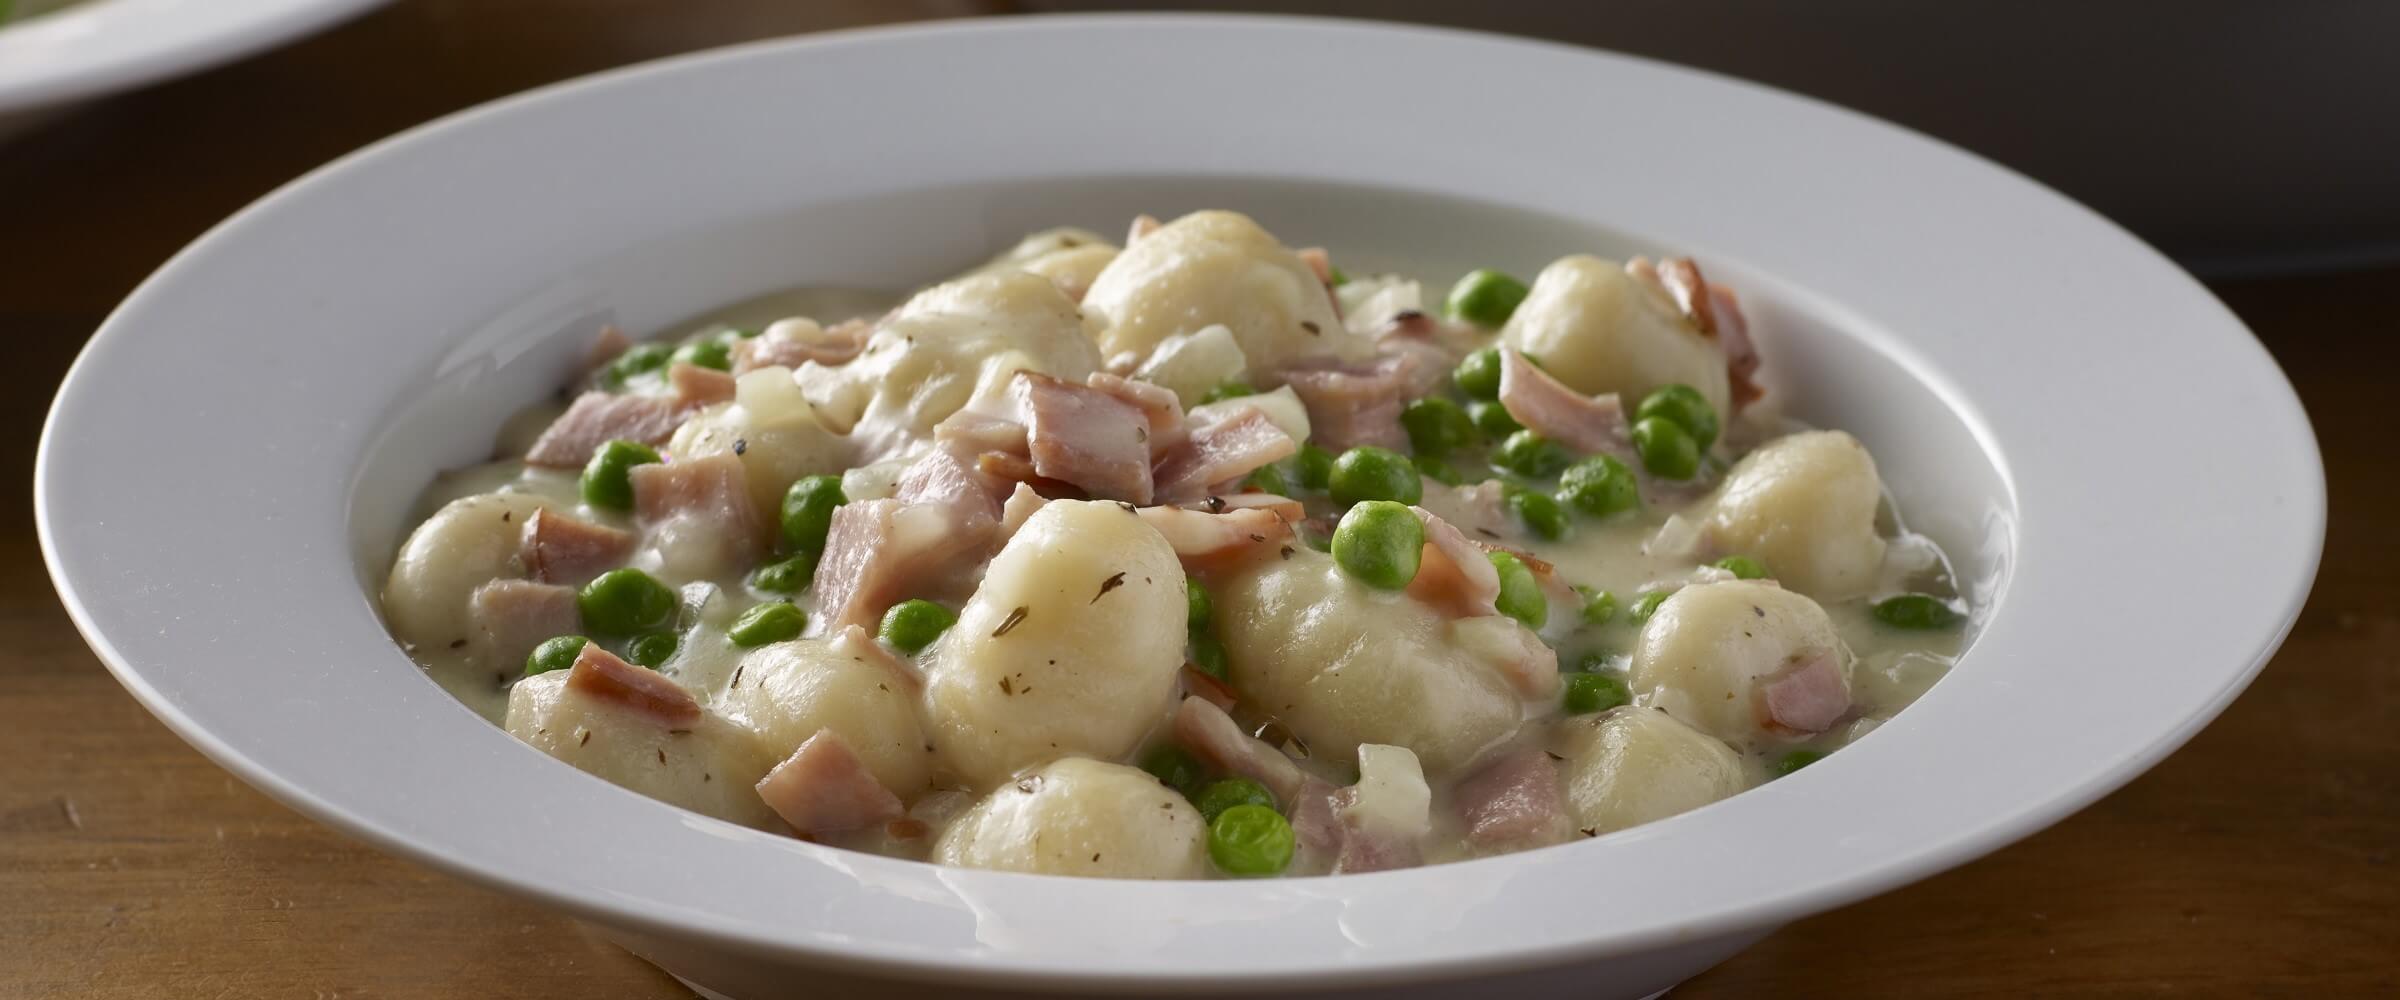 gnocchi skillet with ham and peas in white bowl